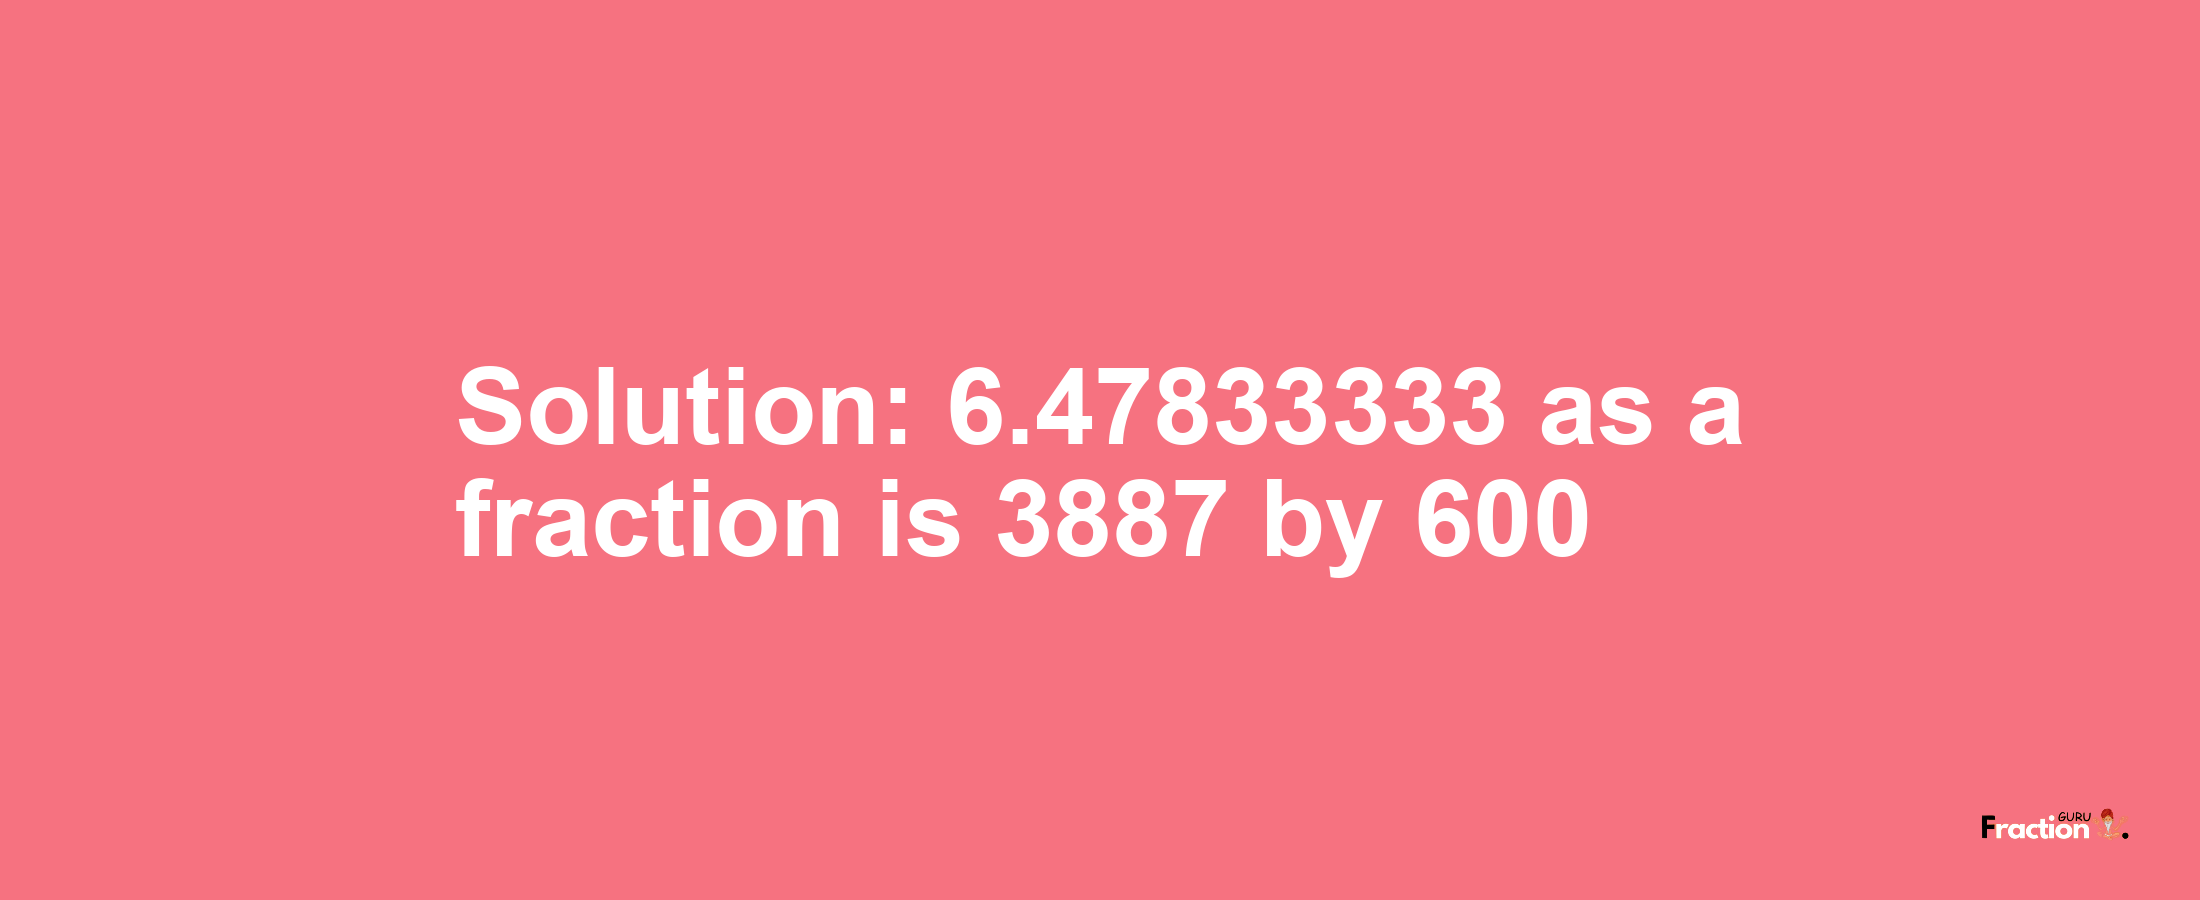 Solution:6.47833333 as a fraction is 3887/600